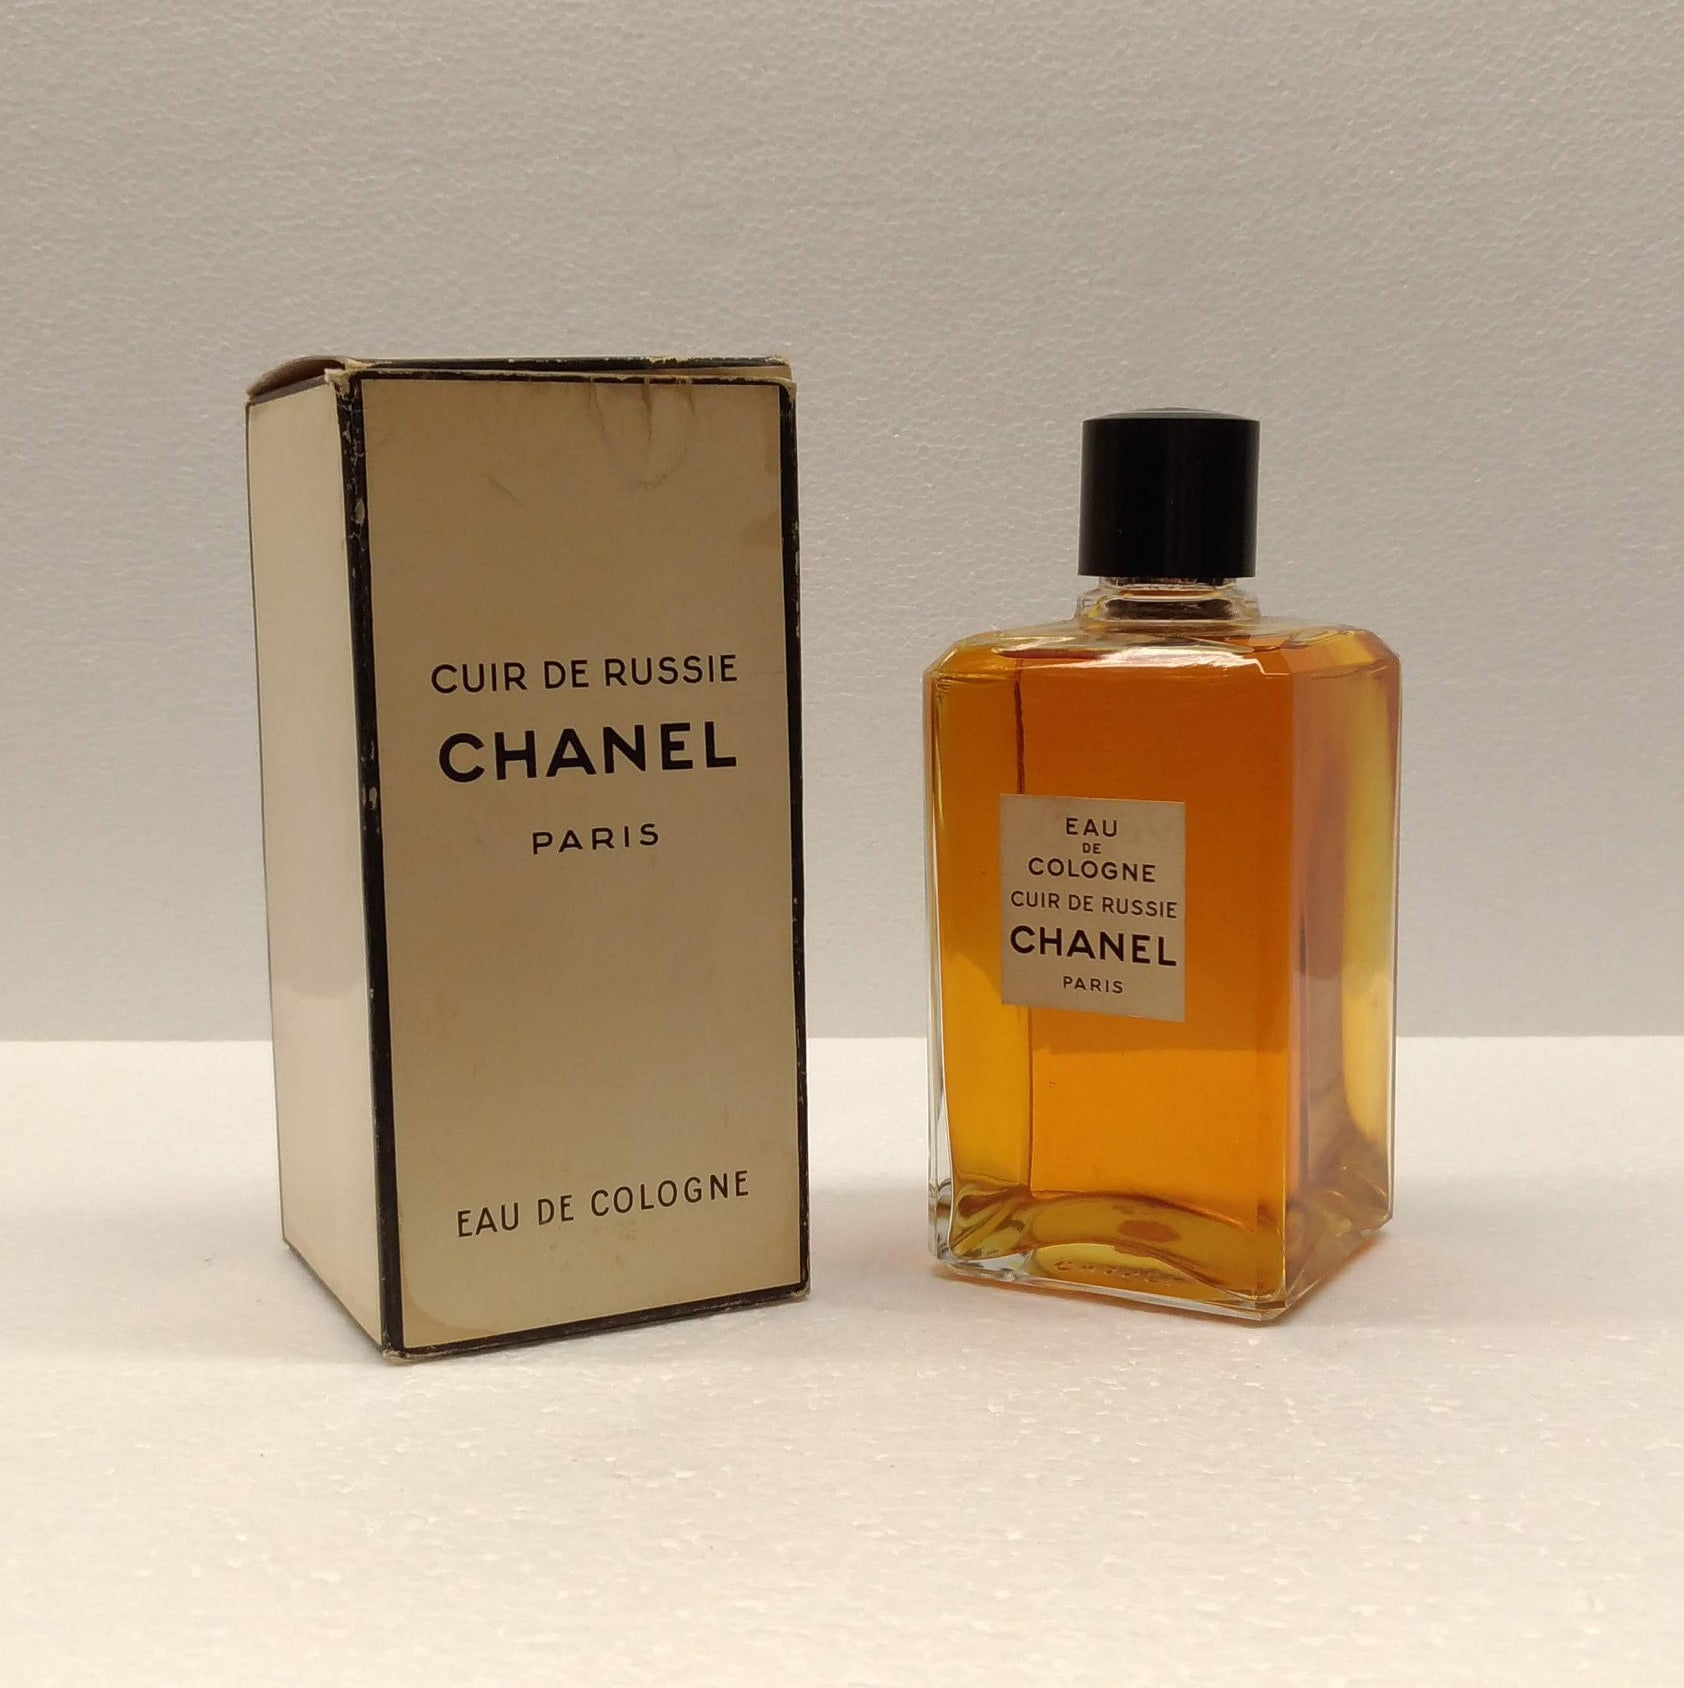 Cuir de Russie / Russia Leather by Chanel (Parfum) » Reviews